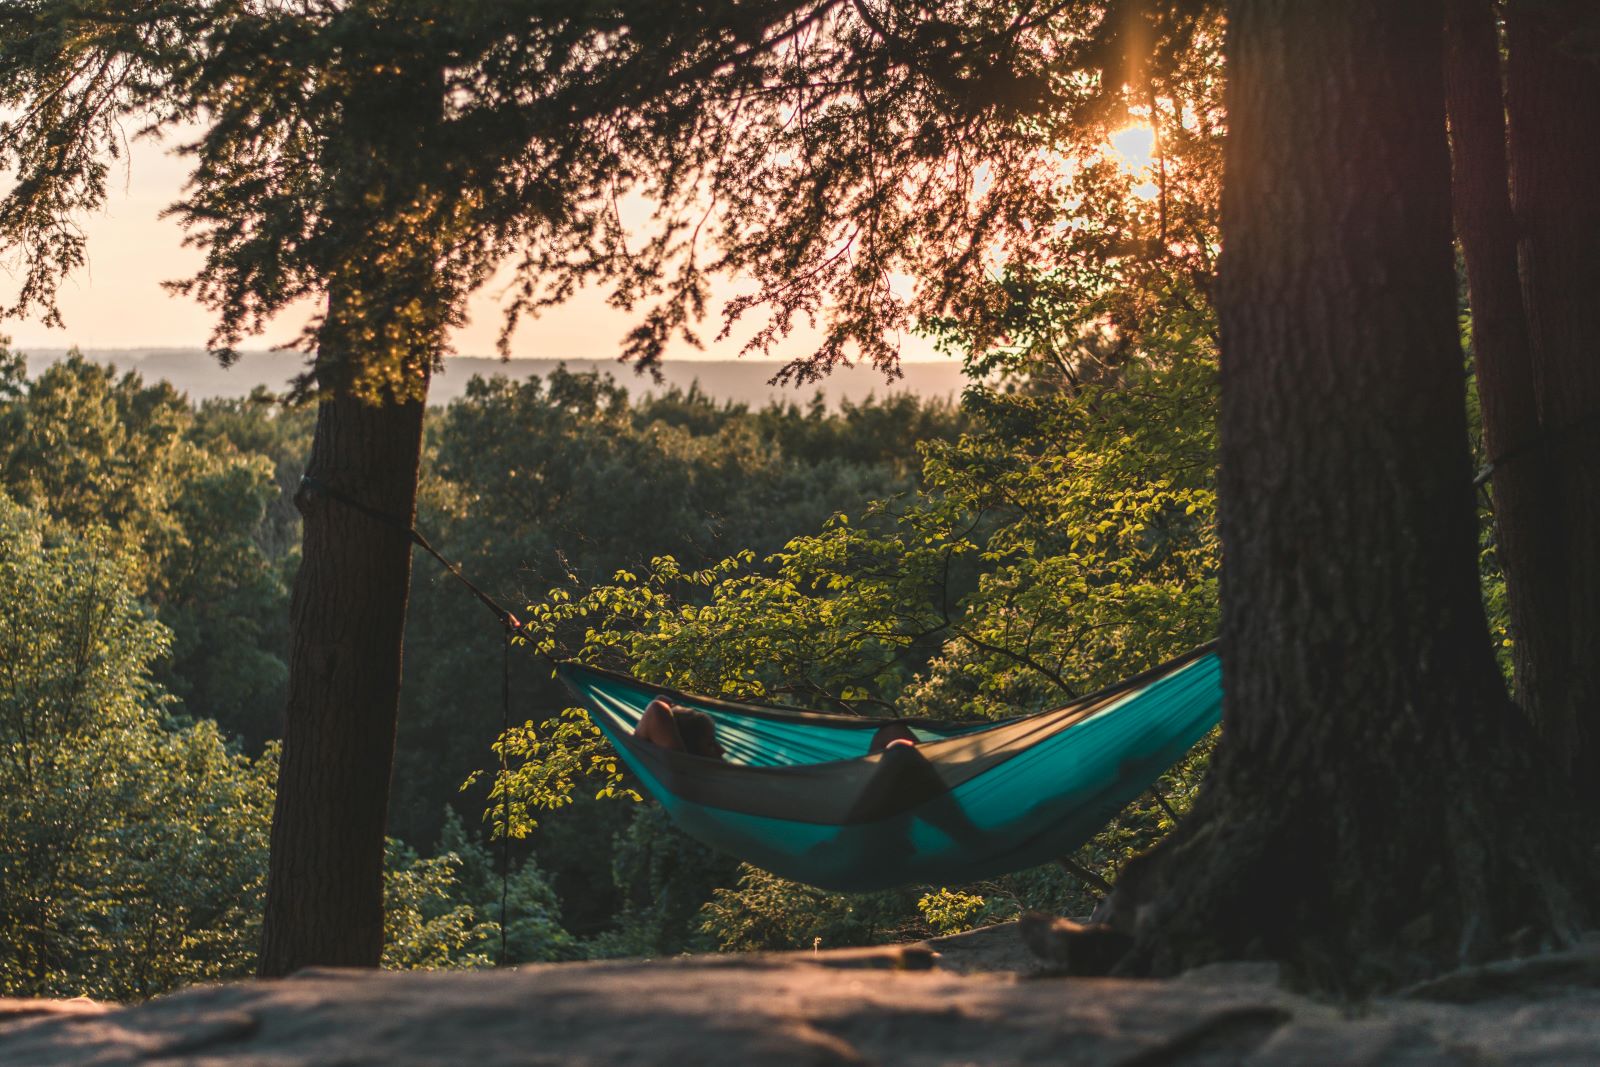 <p class="wp-caption-text">Image Credit: Pexels / Max Andrey</p>  <p>Ever heard of Hidden Hammock? Probably not. It’s tucked away and perfect for a secluded picnic after some water fun.</p>